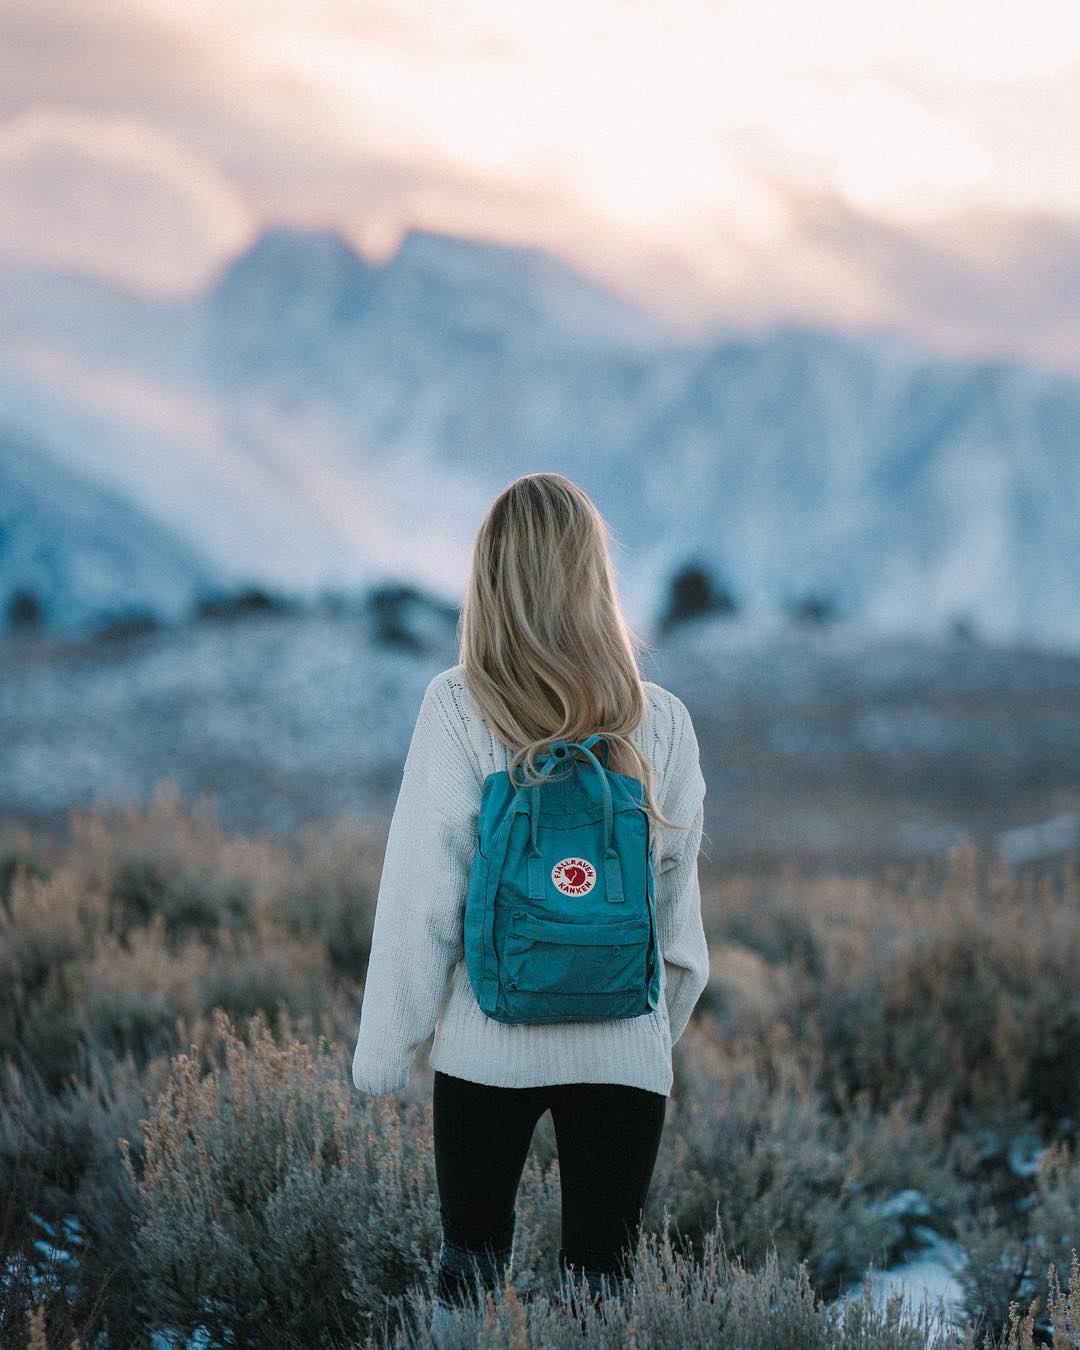 Girl Looks Out Over the Mountains at Sunset with Fjallraven Kanken Backpack